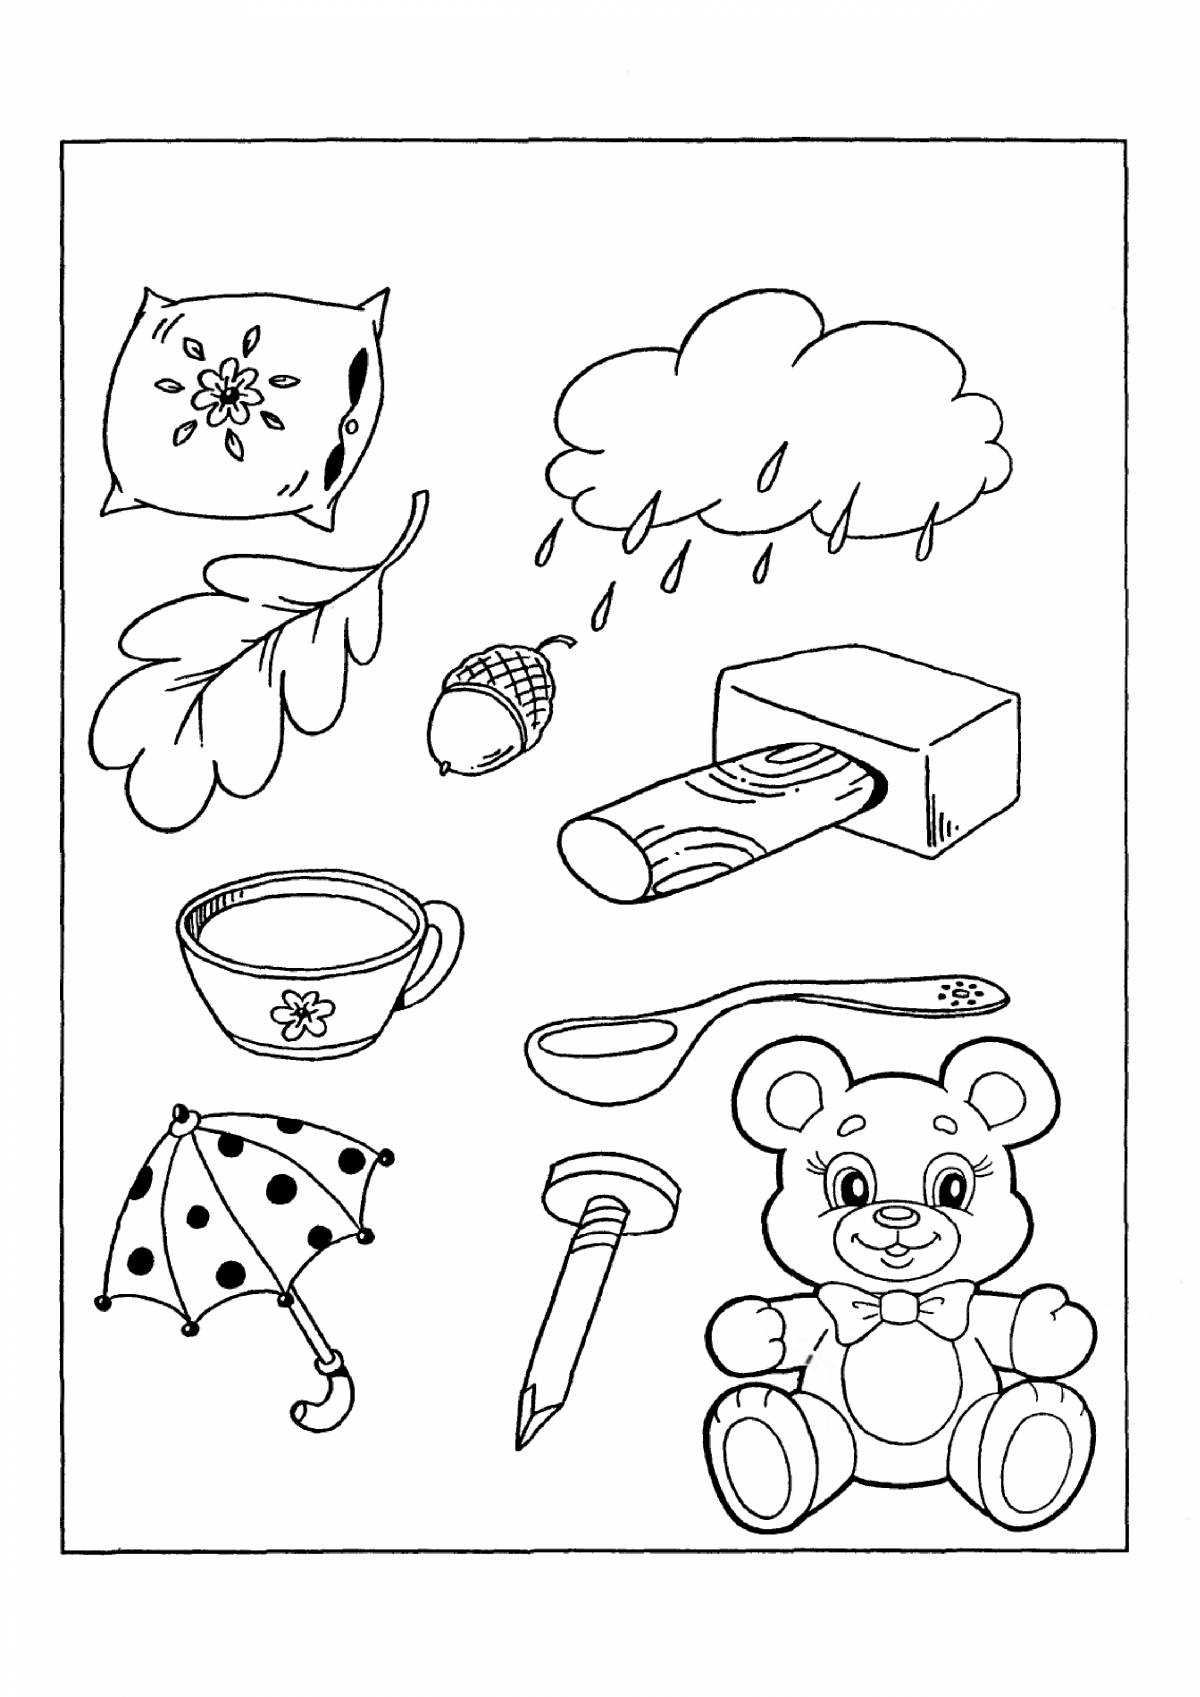 Bright coloring page 5 years of development